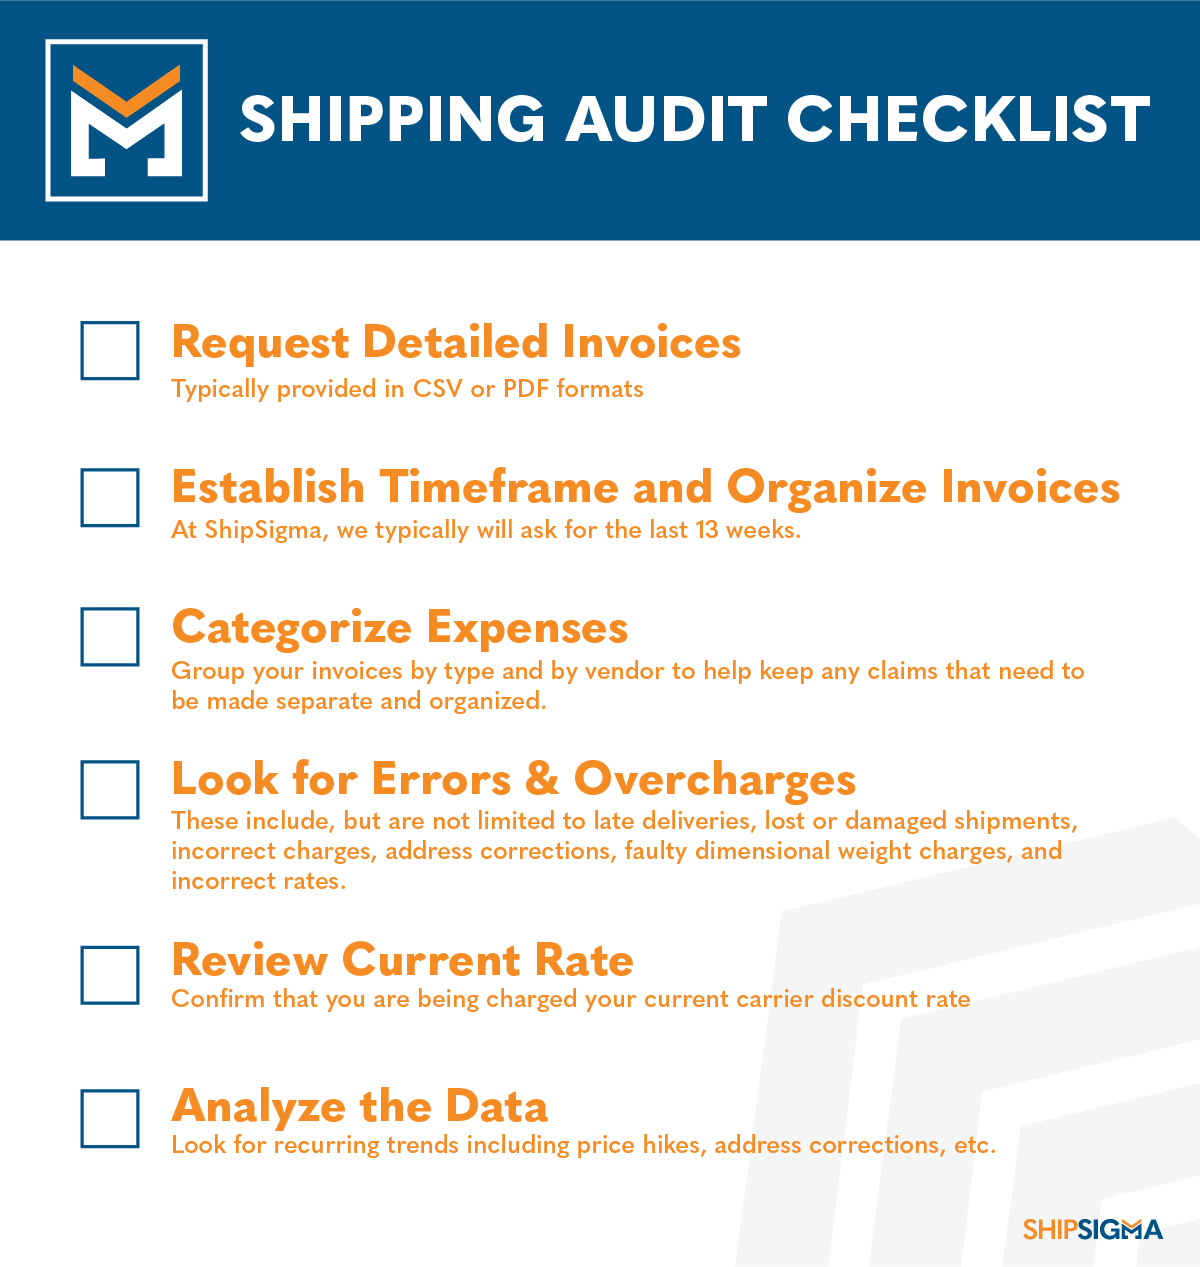 What Should an Audit Checklist Include